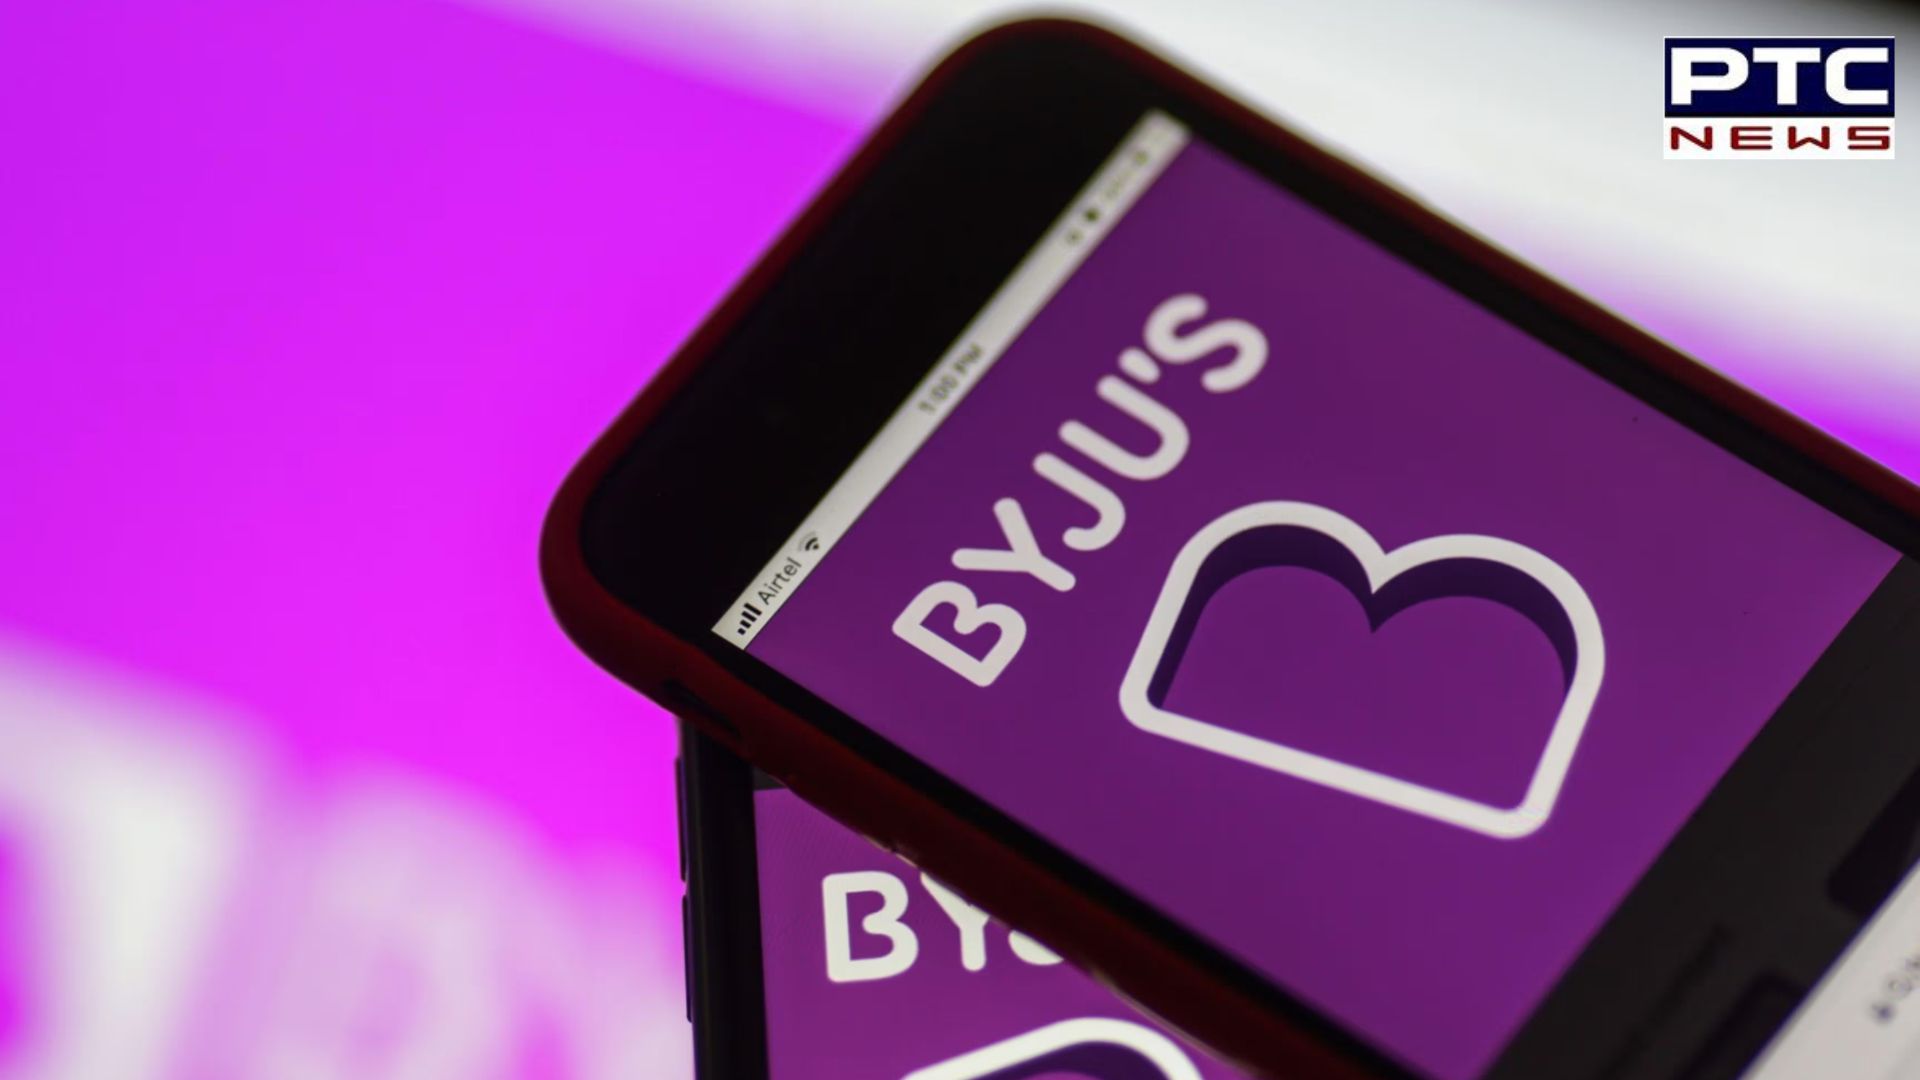 Byju's to fire 500 employees amid financial strain: Report